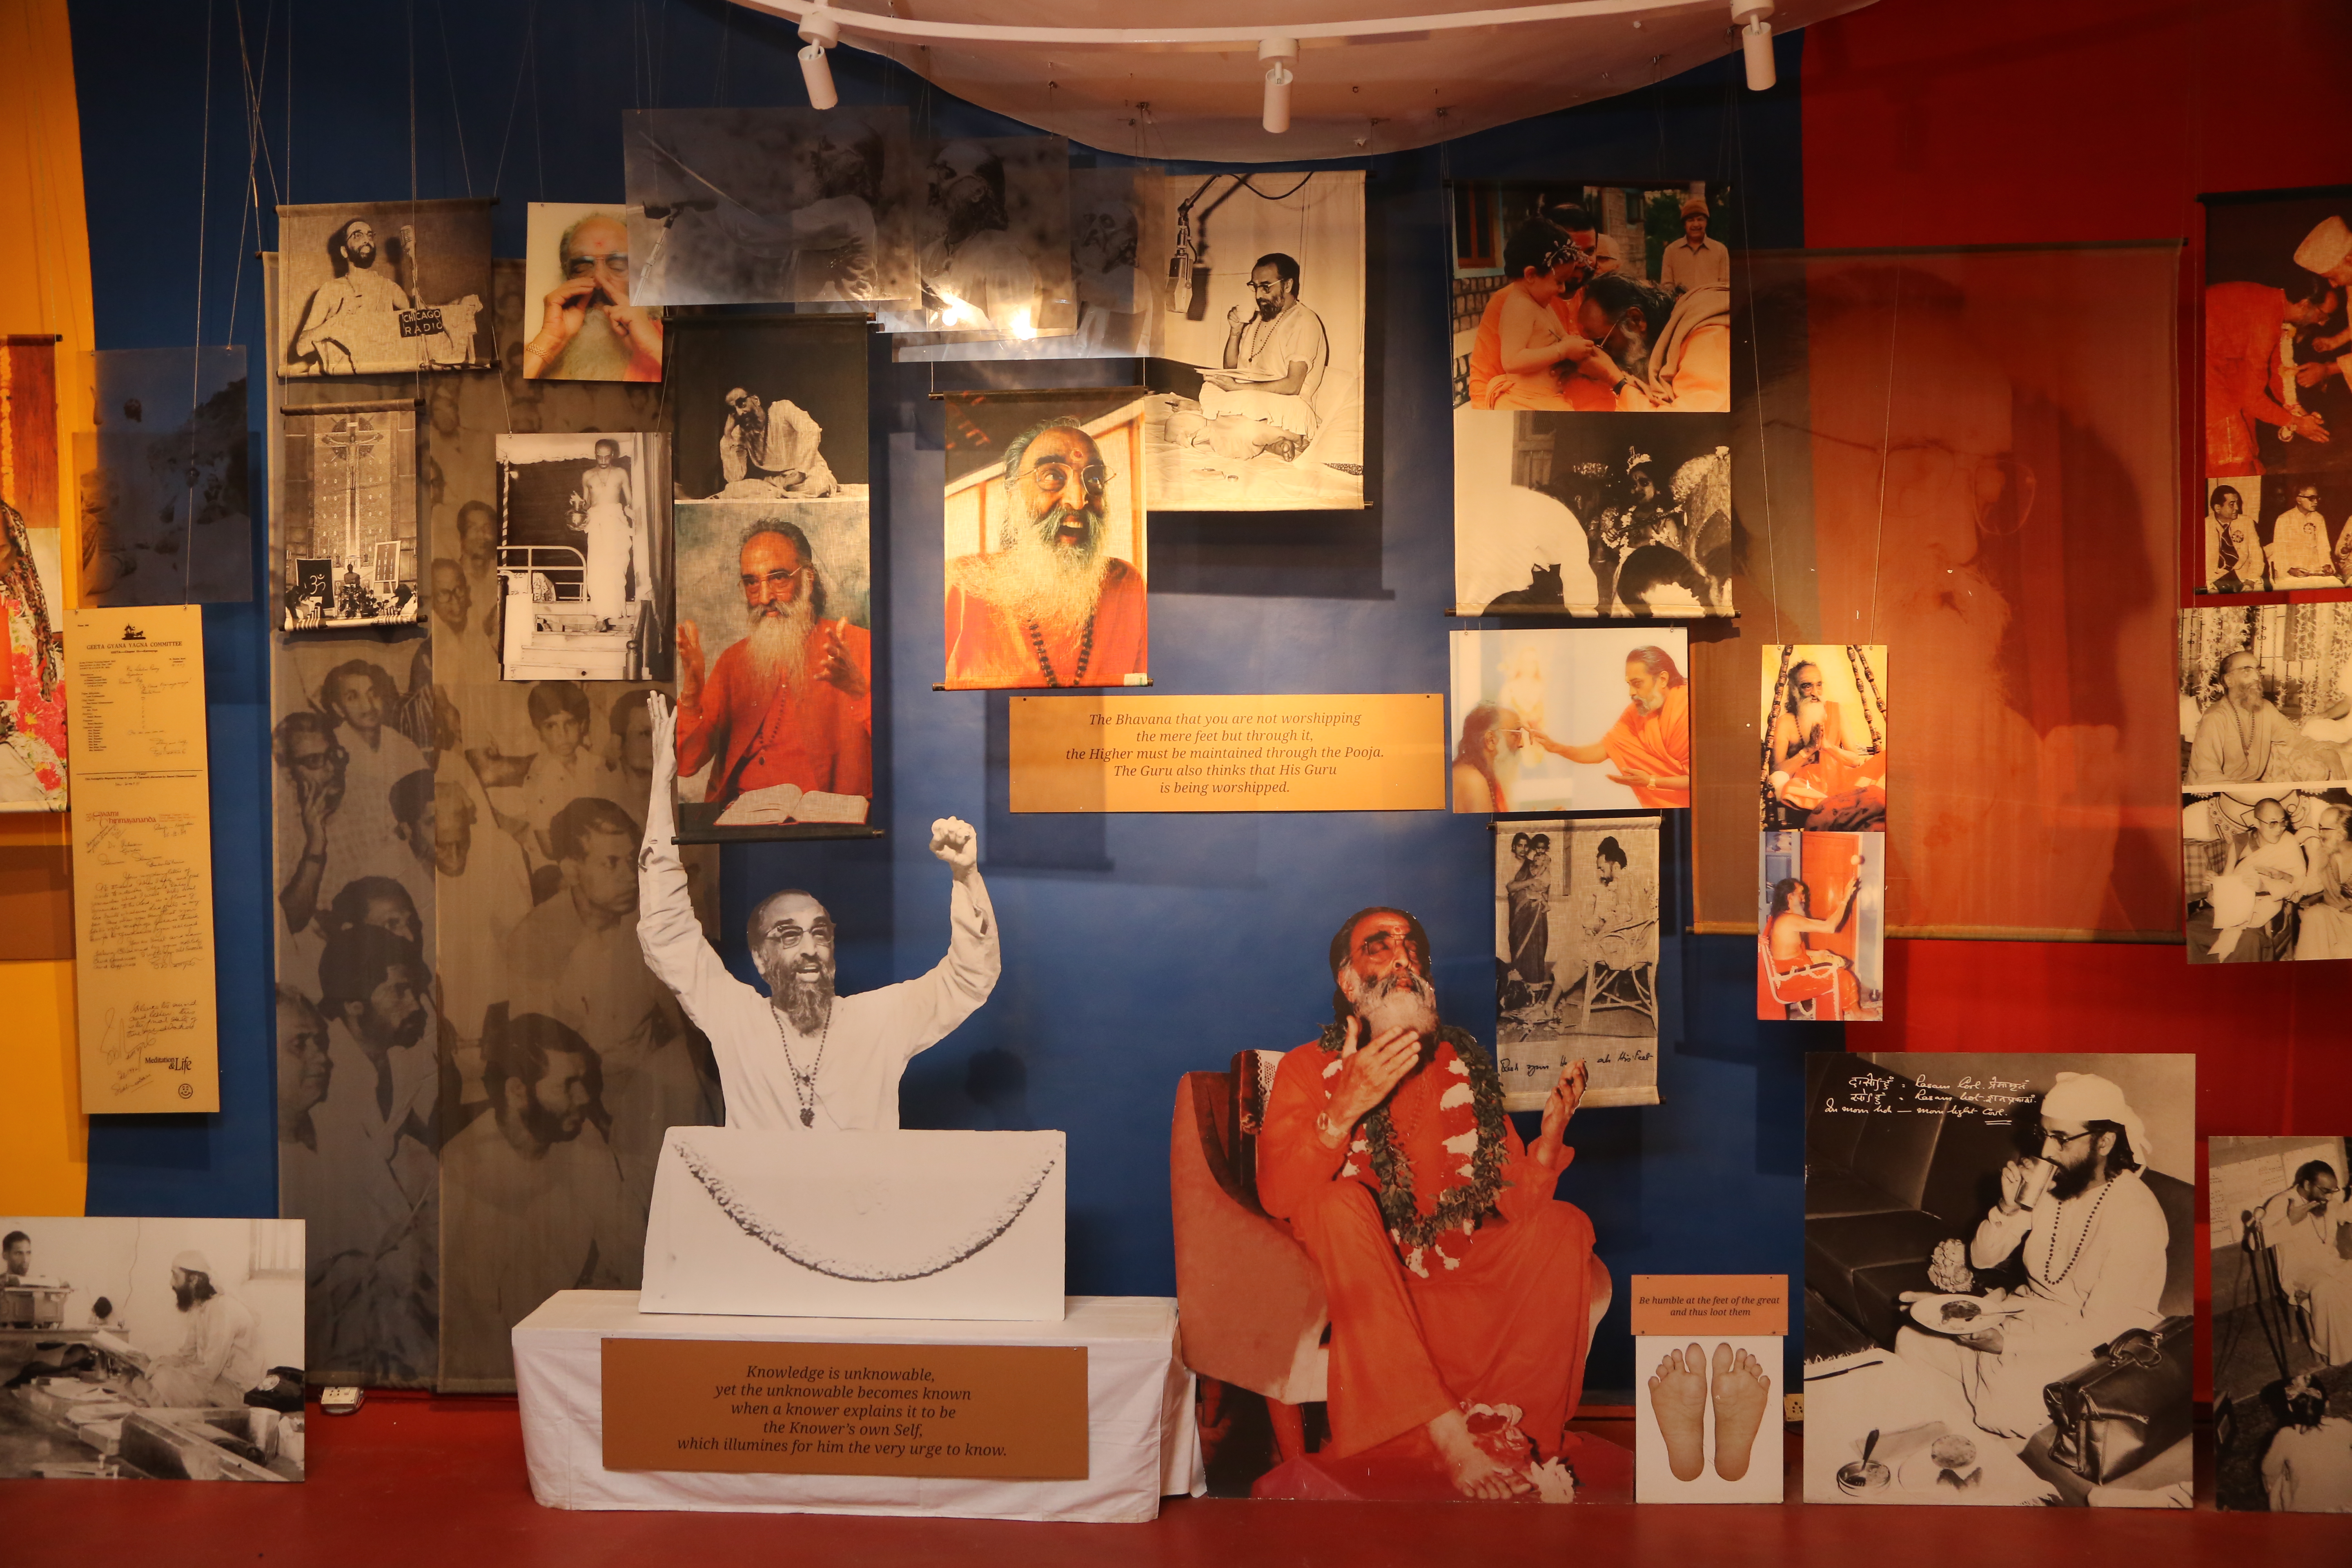 A day in the life of Swami Chinmayananda